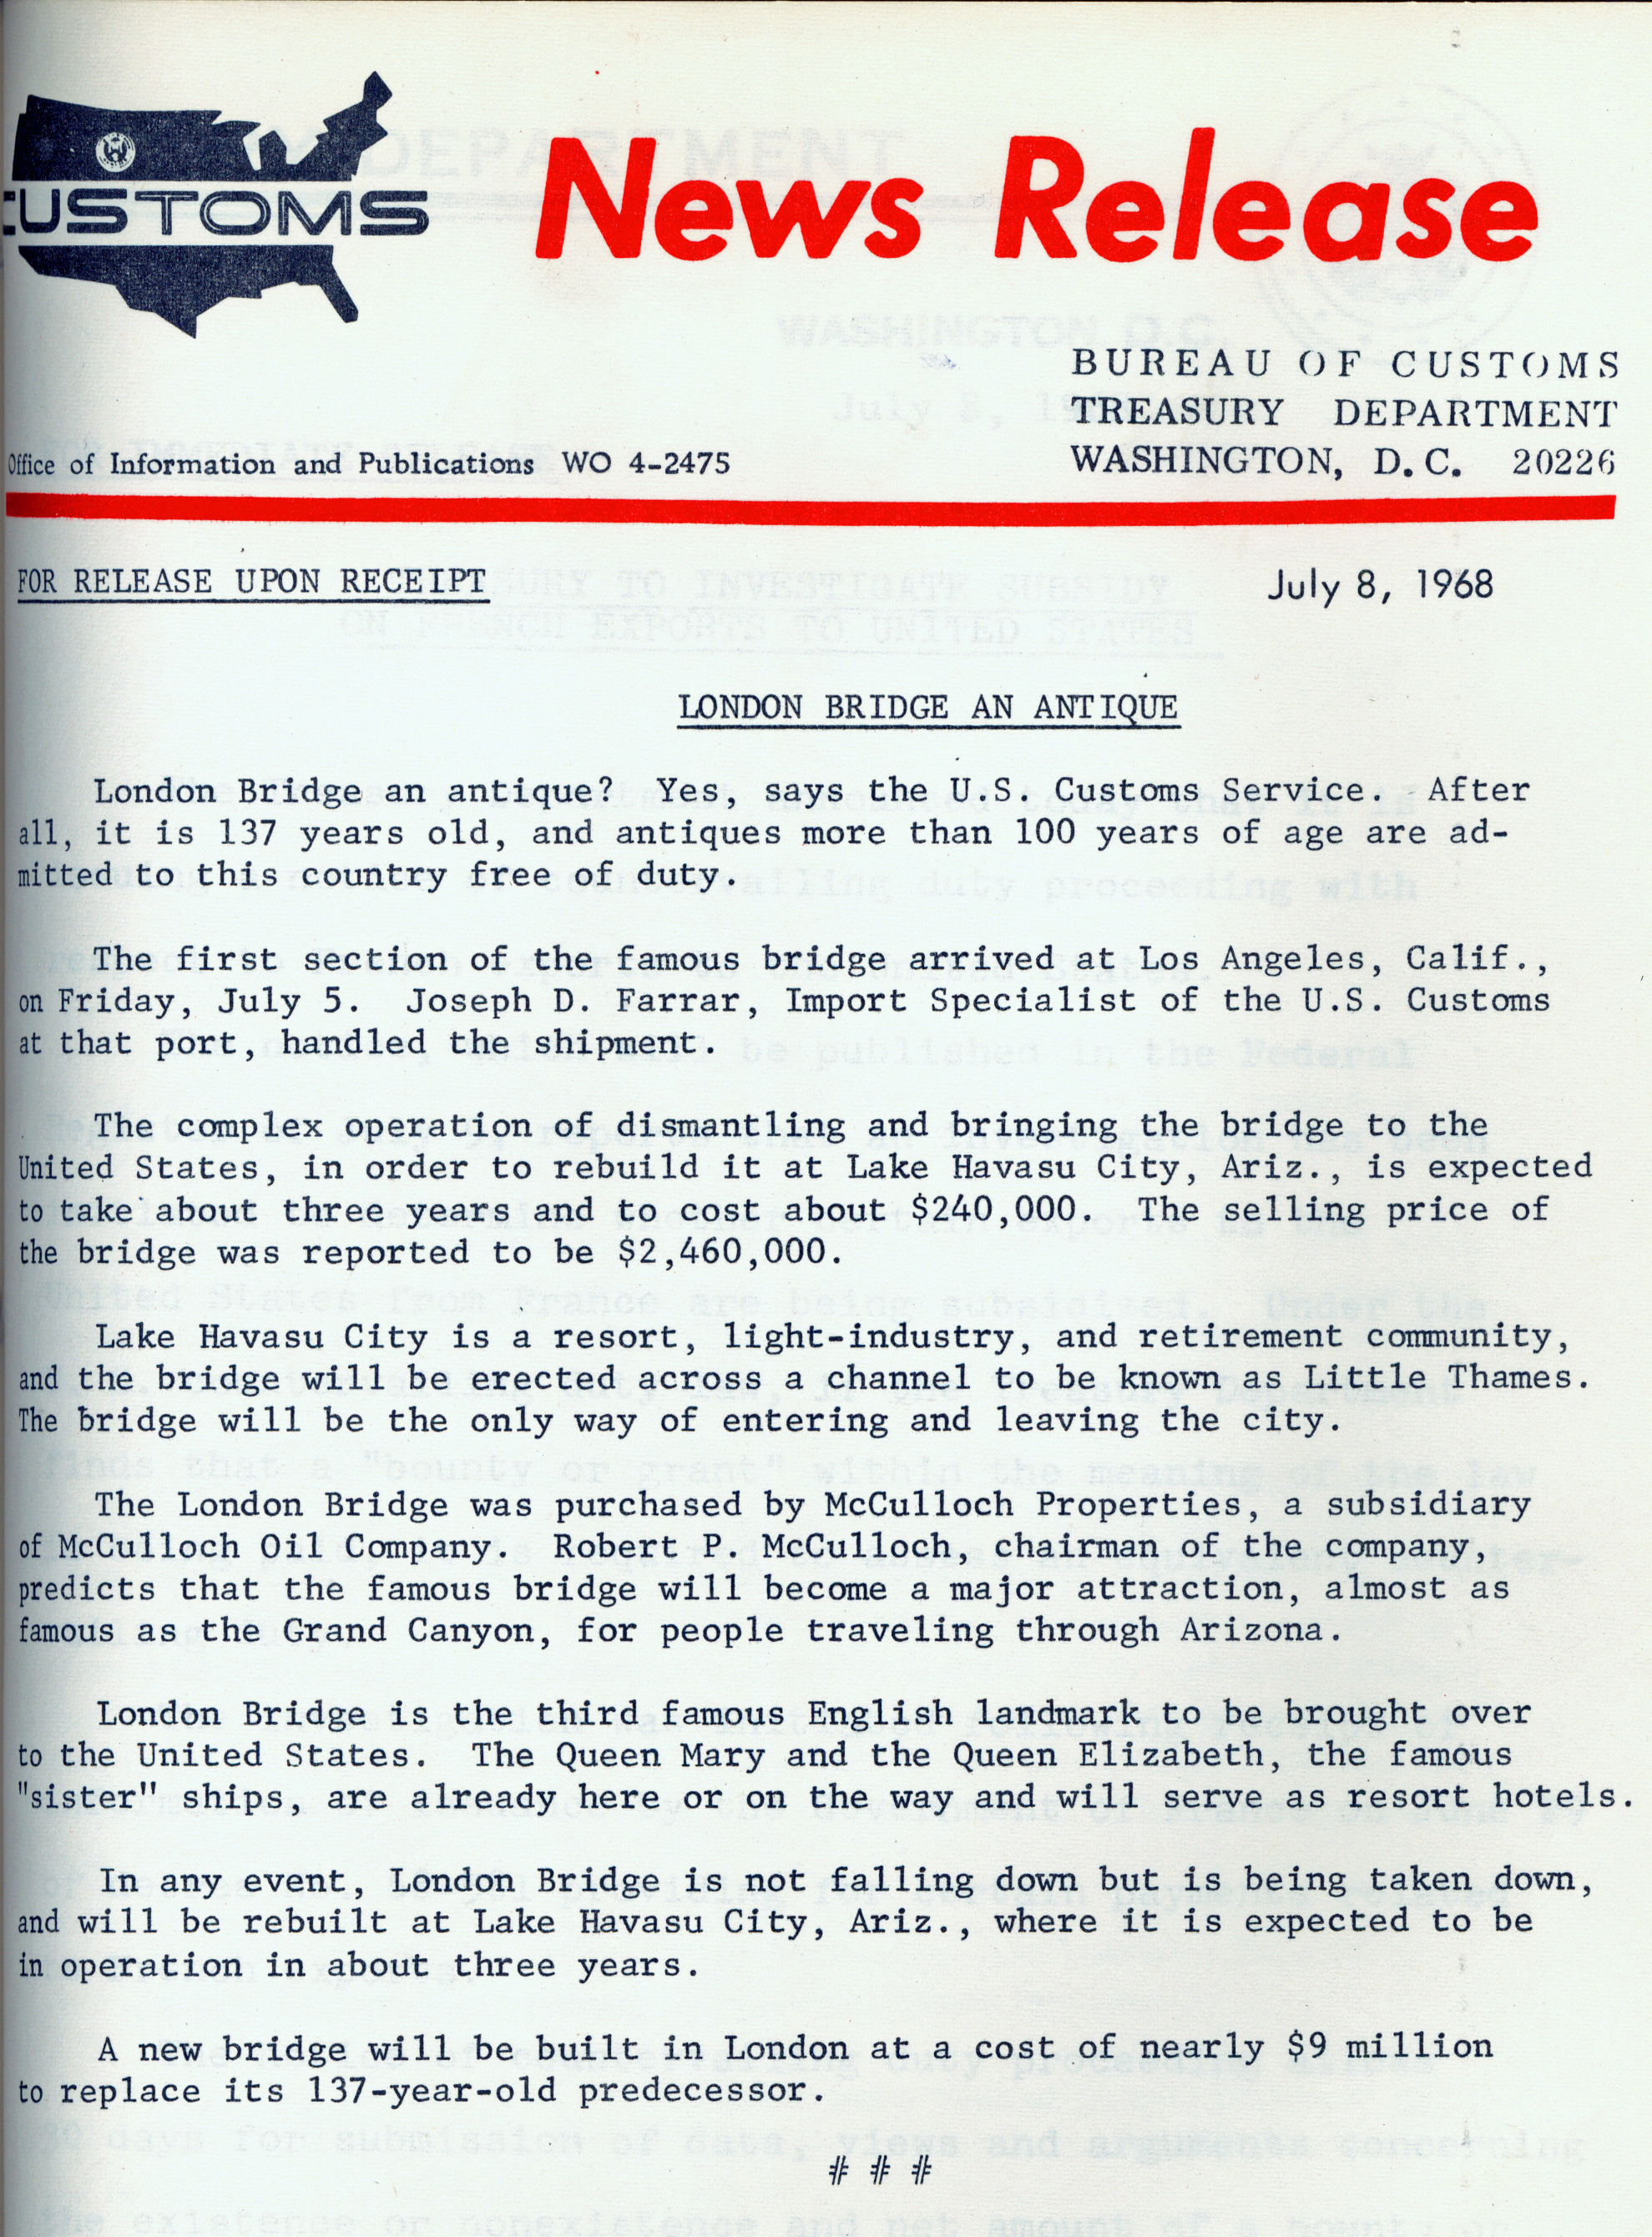 U.S. Customs Service news release from July 8, 1968 discussing that London Bridge was declared an antique. CBP Historical Collections.